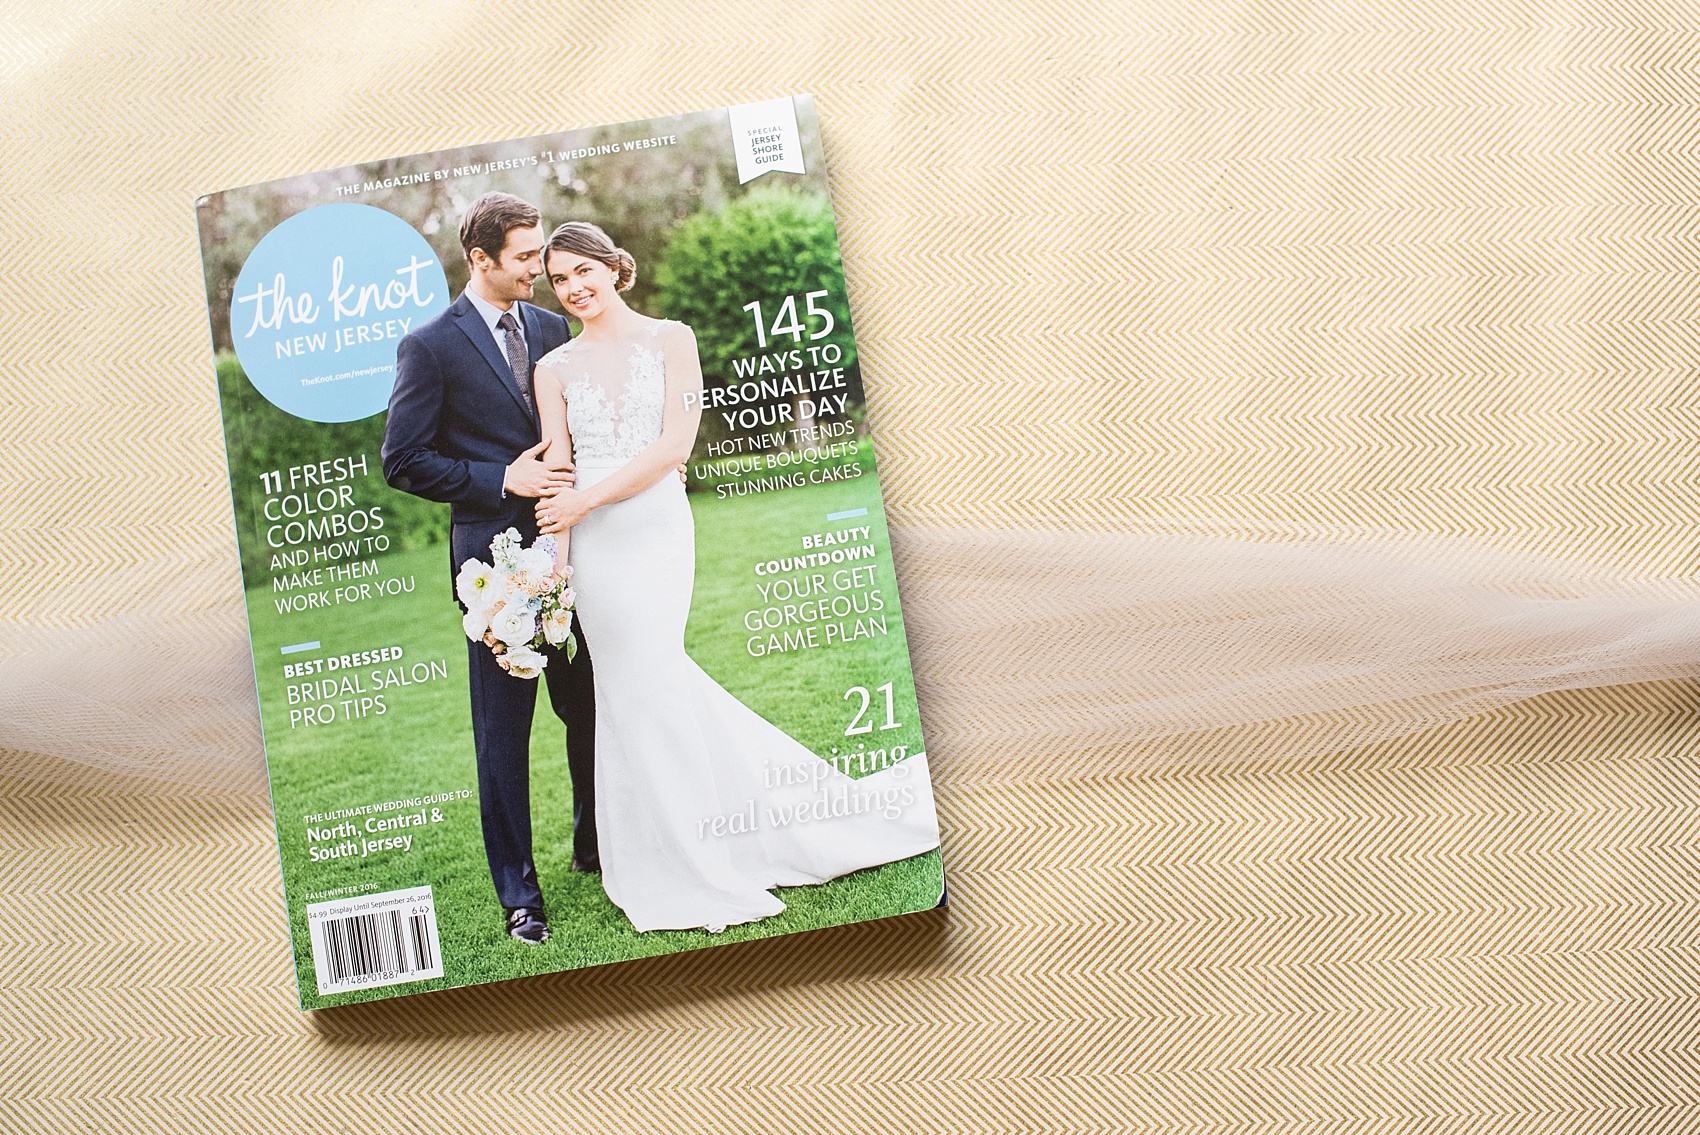 Mikkel Paige Photography featured in The Knot New Jersey for a wedding at Olde Mill Inn with The Arrangement floral designers in NYC for a NJ affair.